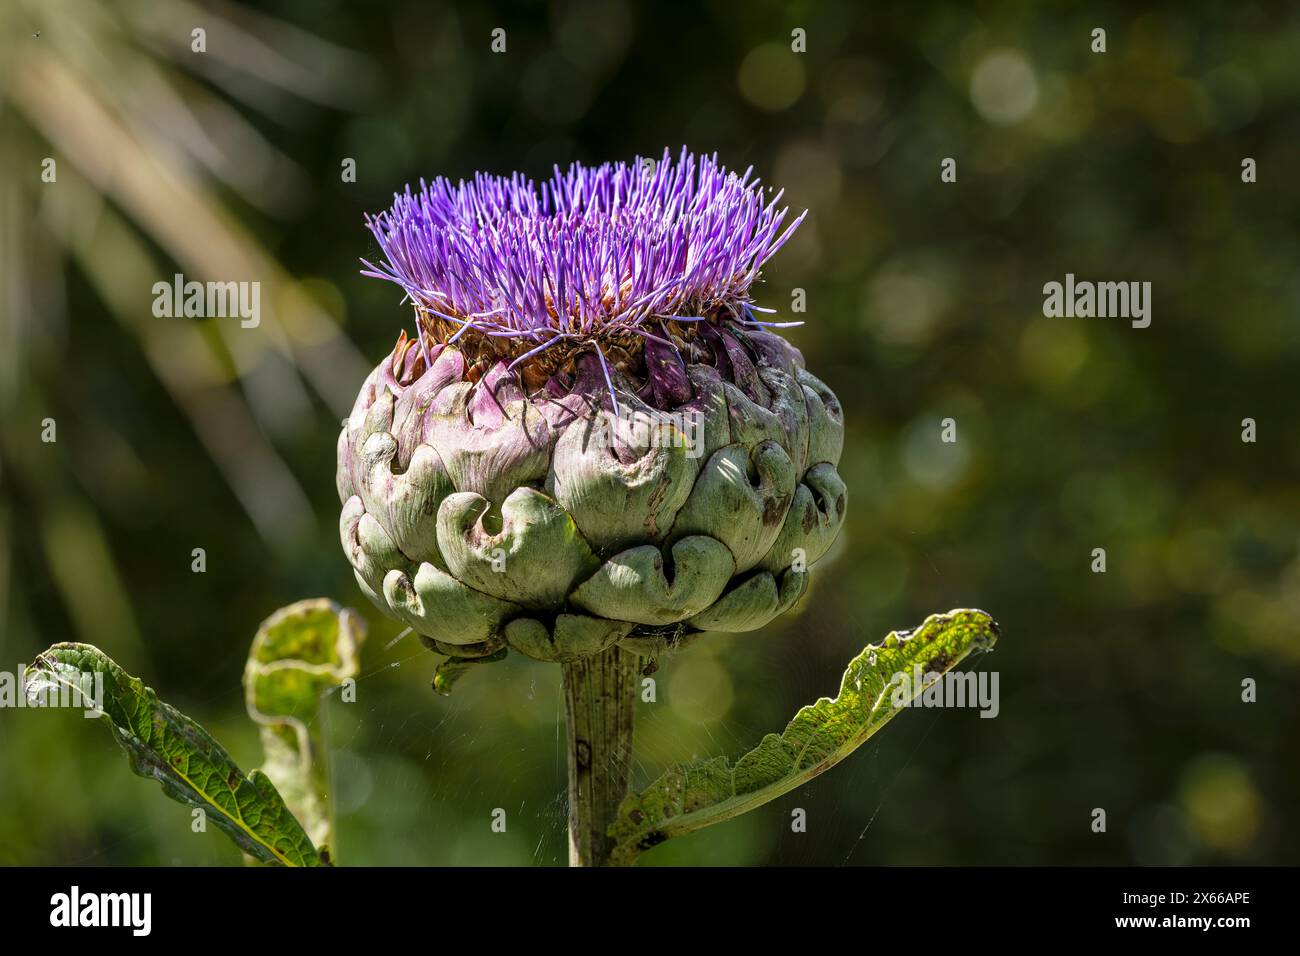 A Cardoon plant Cynara cardunculus in bloom in a garden in Newquay in Cornwall in the UK. Stock Photo